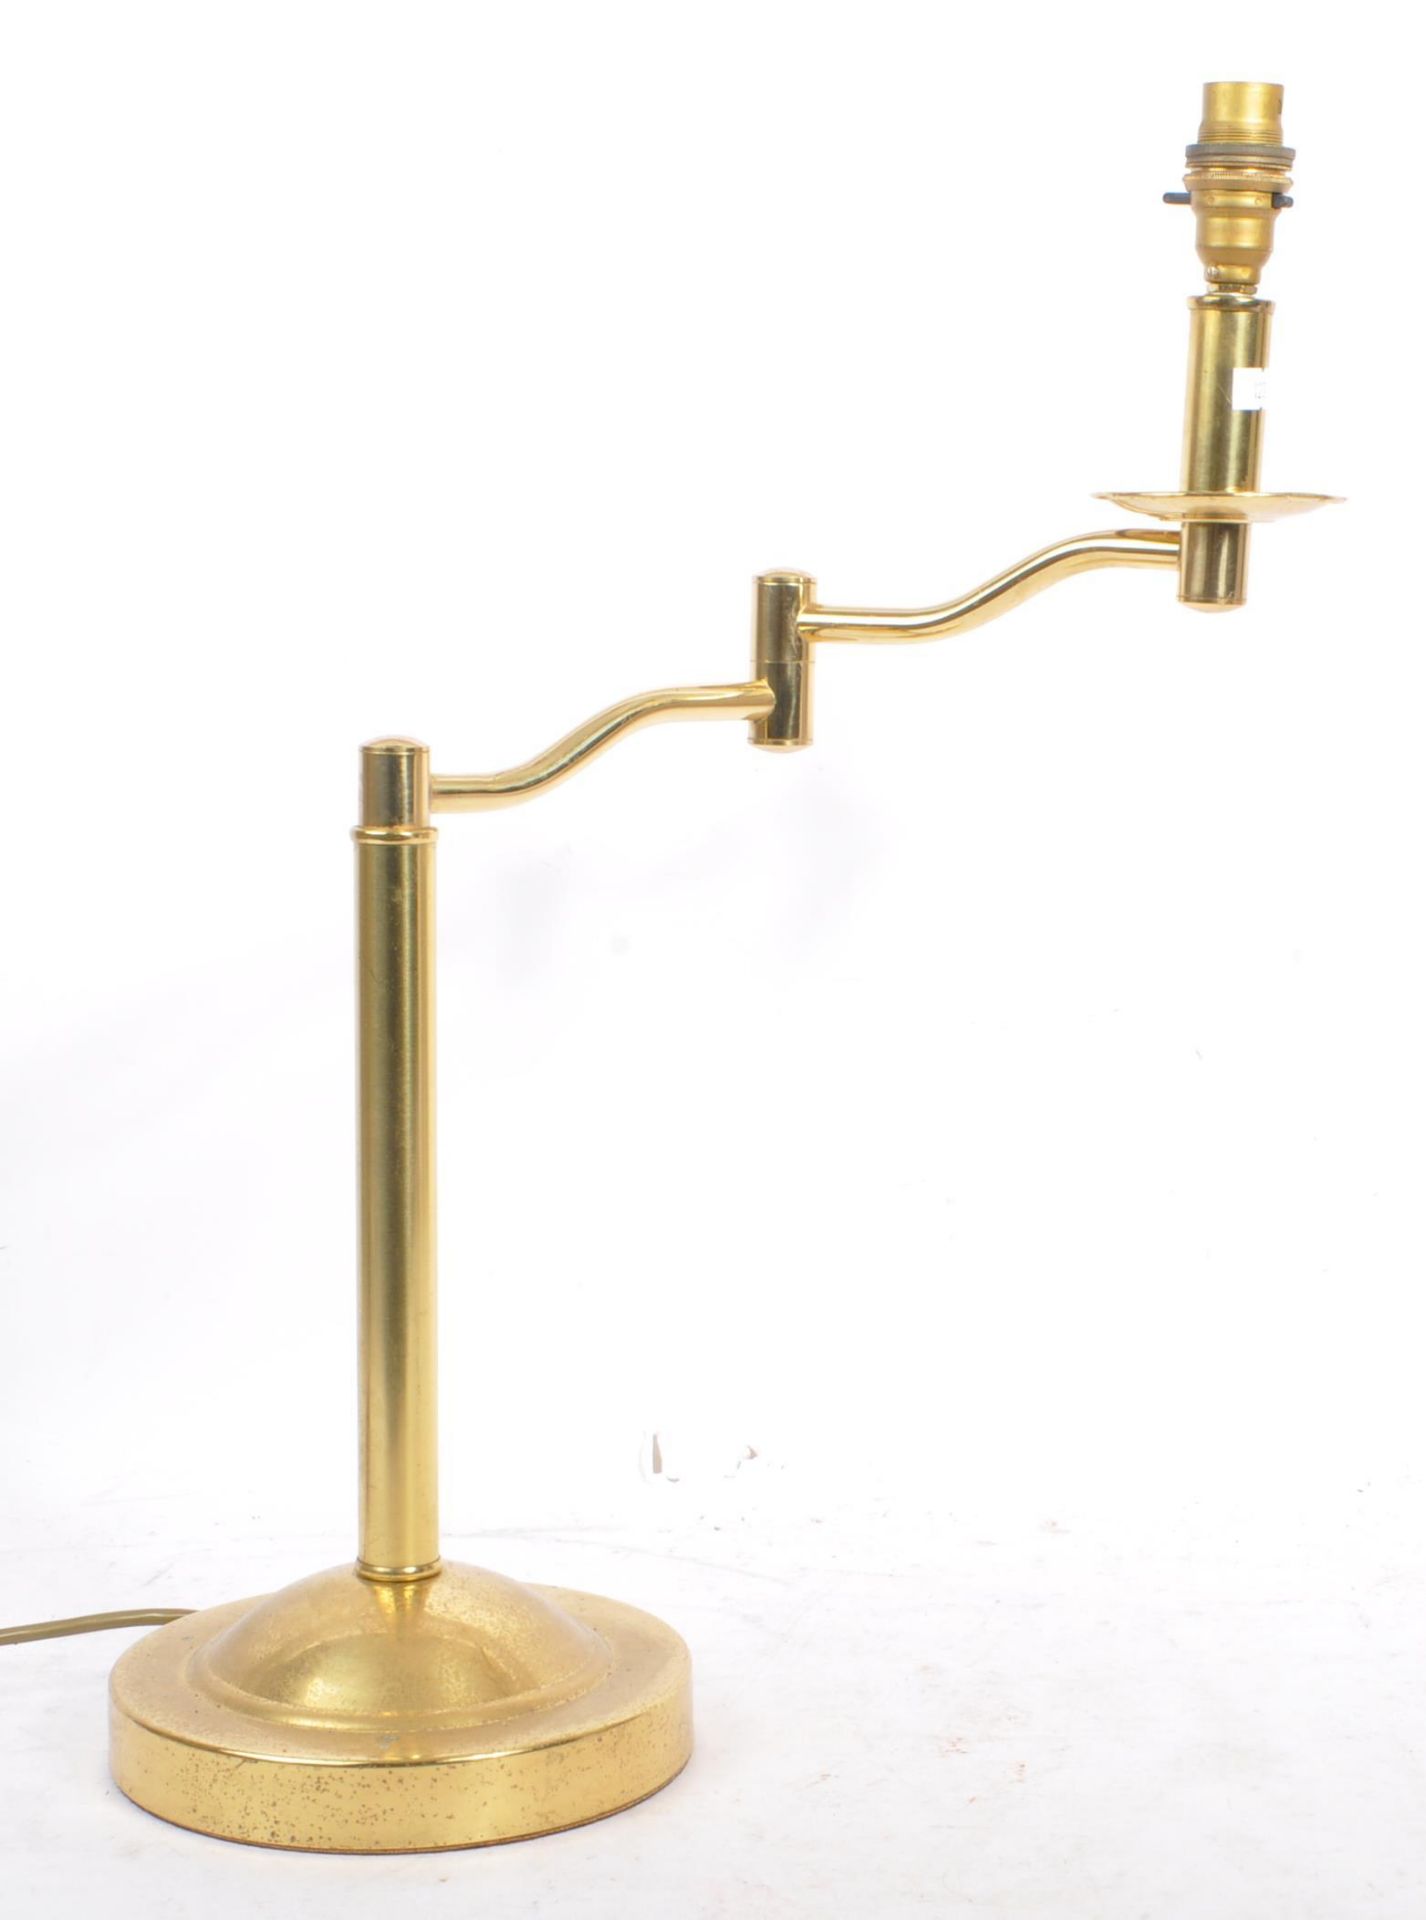 MID 20TH CENTURY BRASS EXTENDING ARM TABLE LAMP